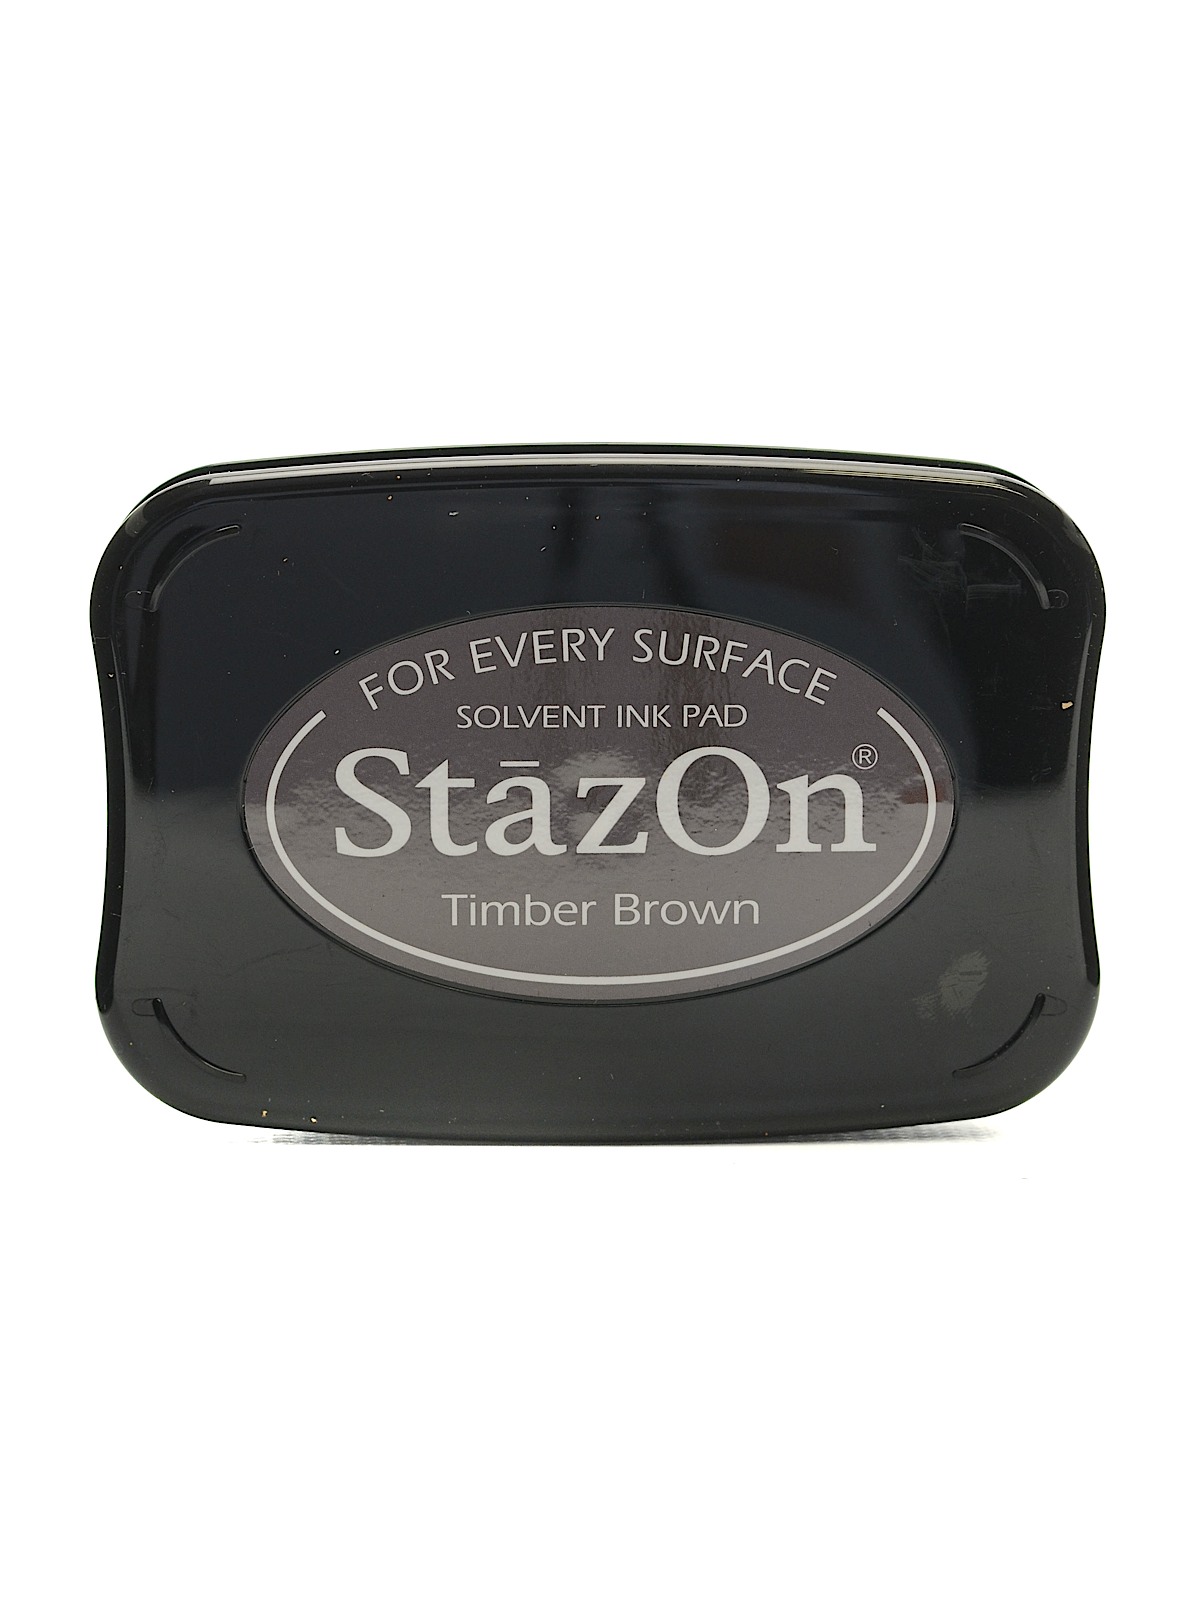 Stazon Solvent Ink Timber Brown 3.75 In. X 2.625 In. Full-size Pad